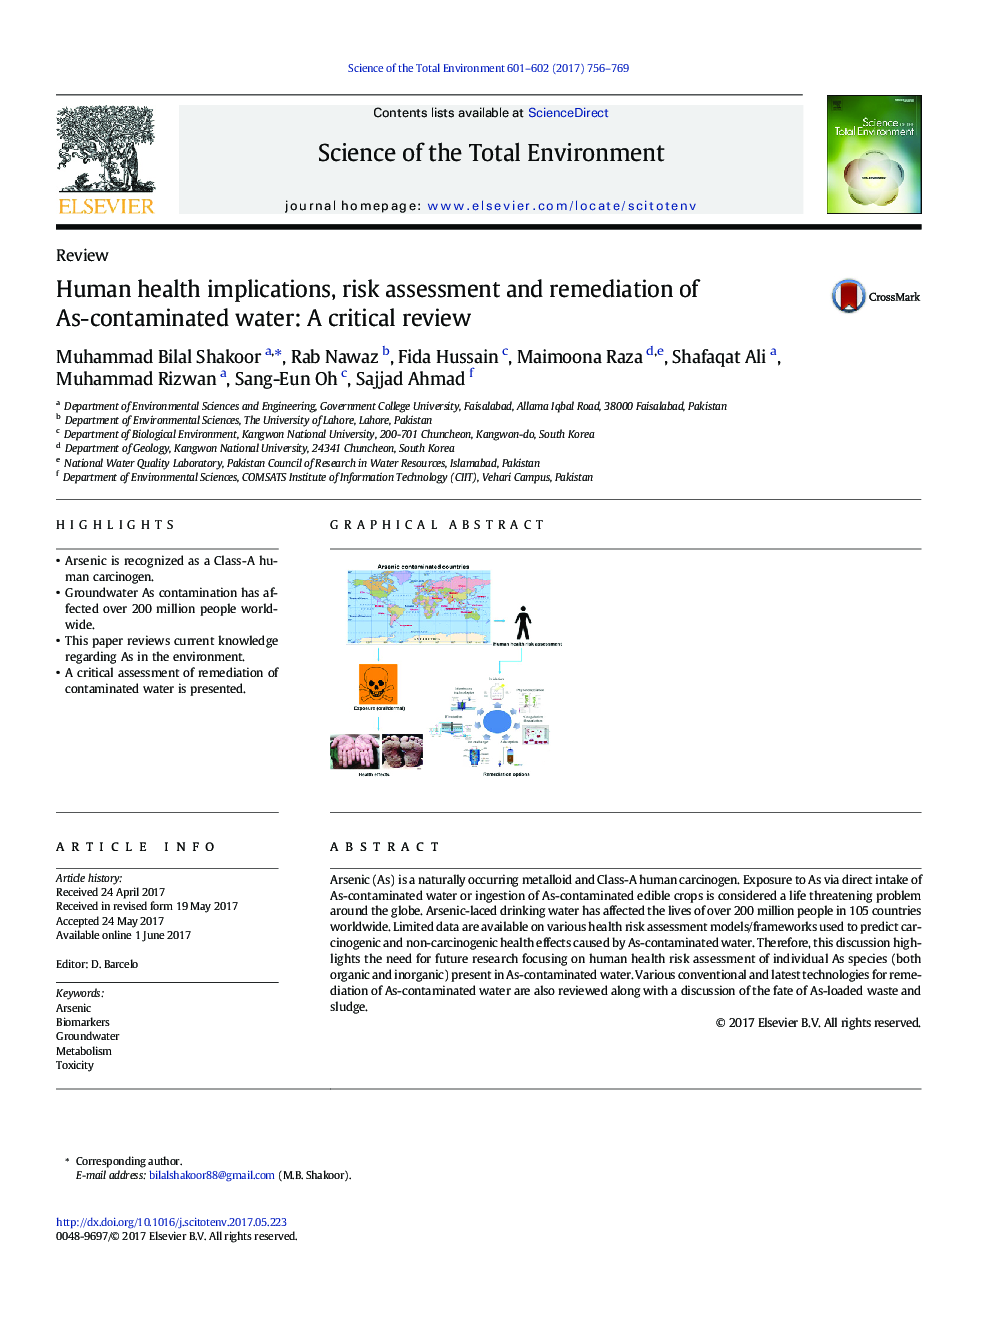 ReviewHuman health implications, risk assessment and remediation of As-contaminated water: A critical review